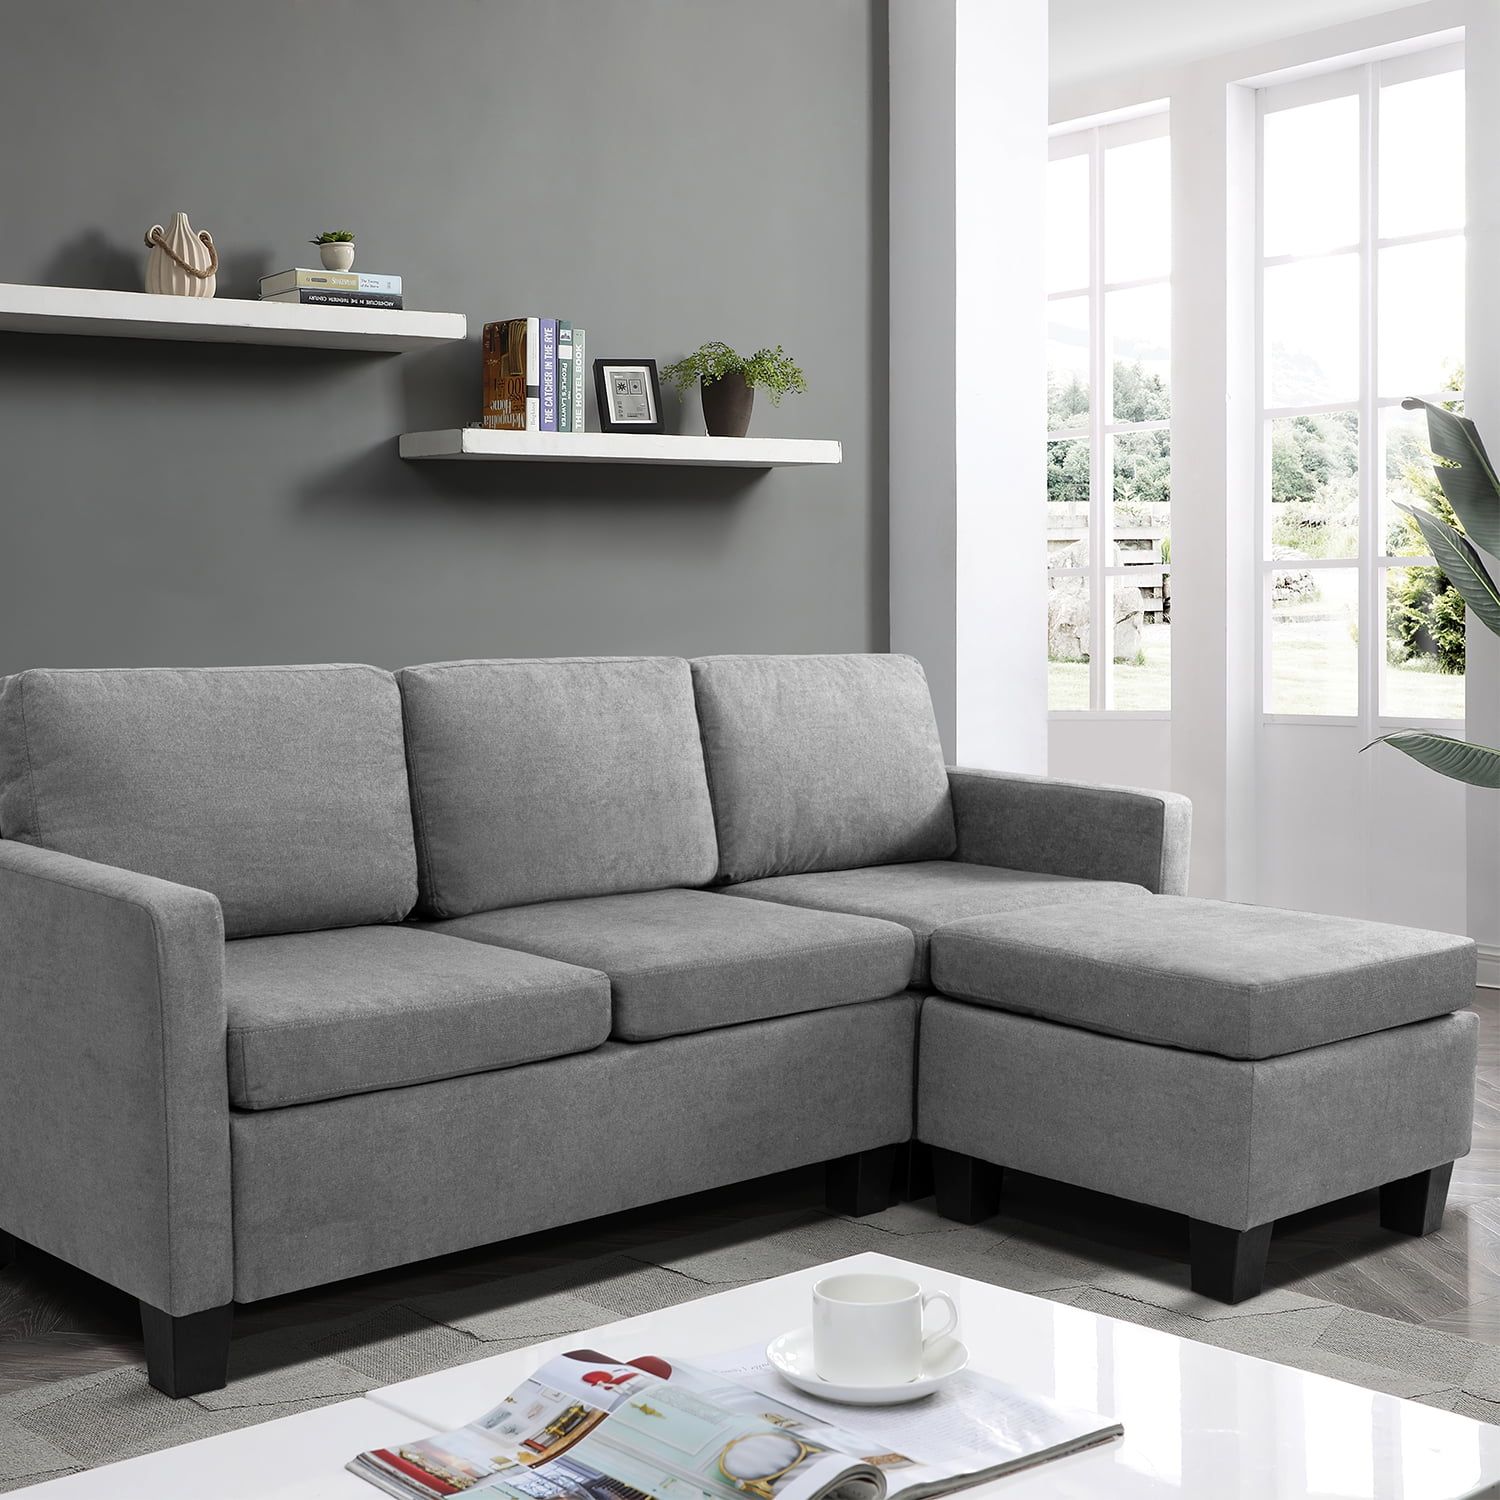 Vineego Linen Fabric L Shape Sofa Sectional Couch For Living Room, Gray –  Walmart Regarding Gray Linen Sofas (View 3 of 15)